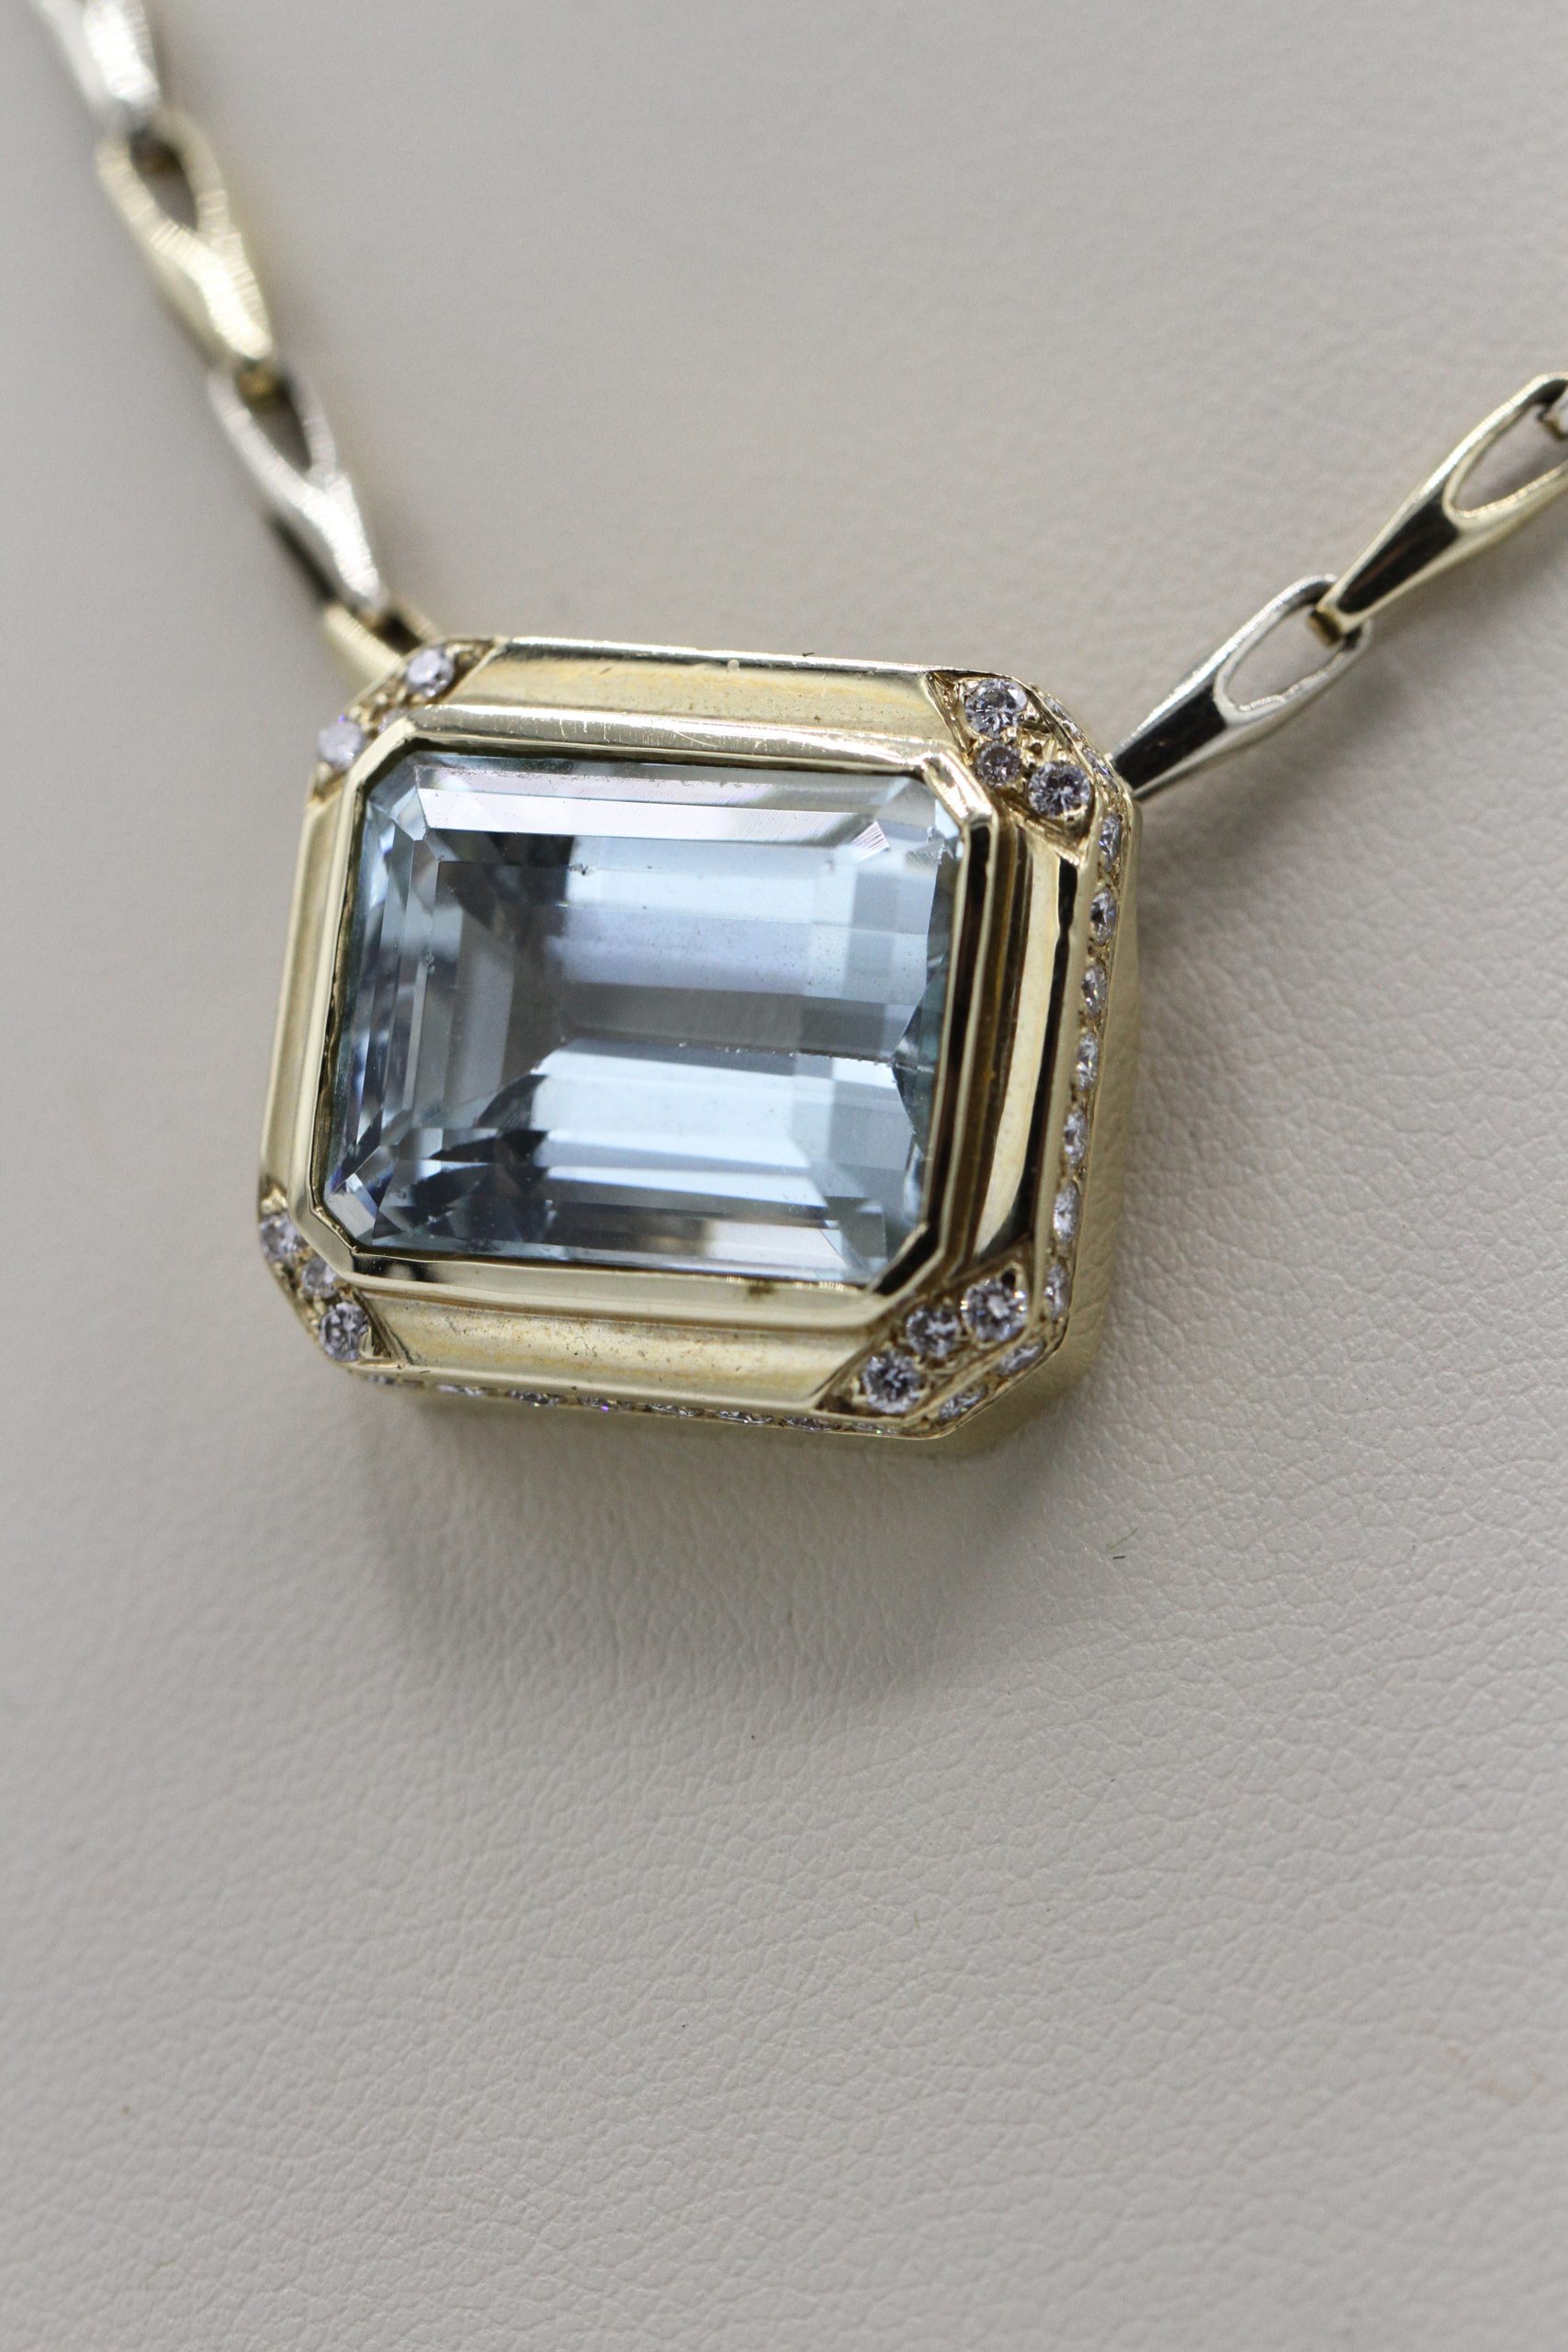 A necklace with a large, square large centerpiece